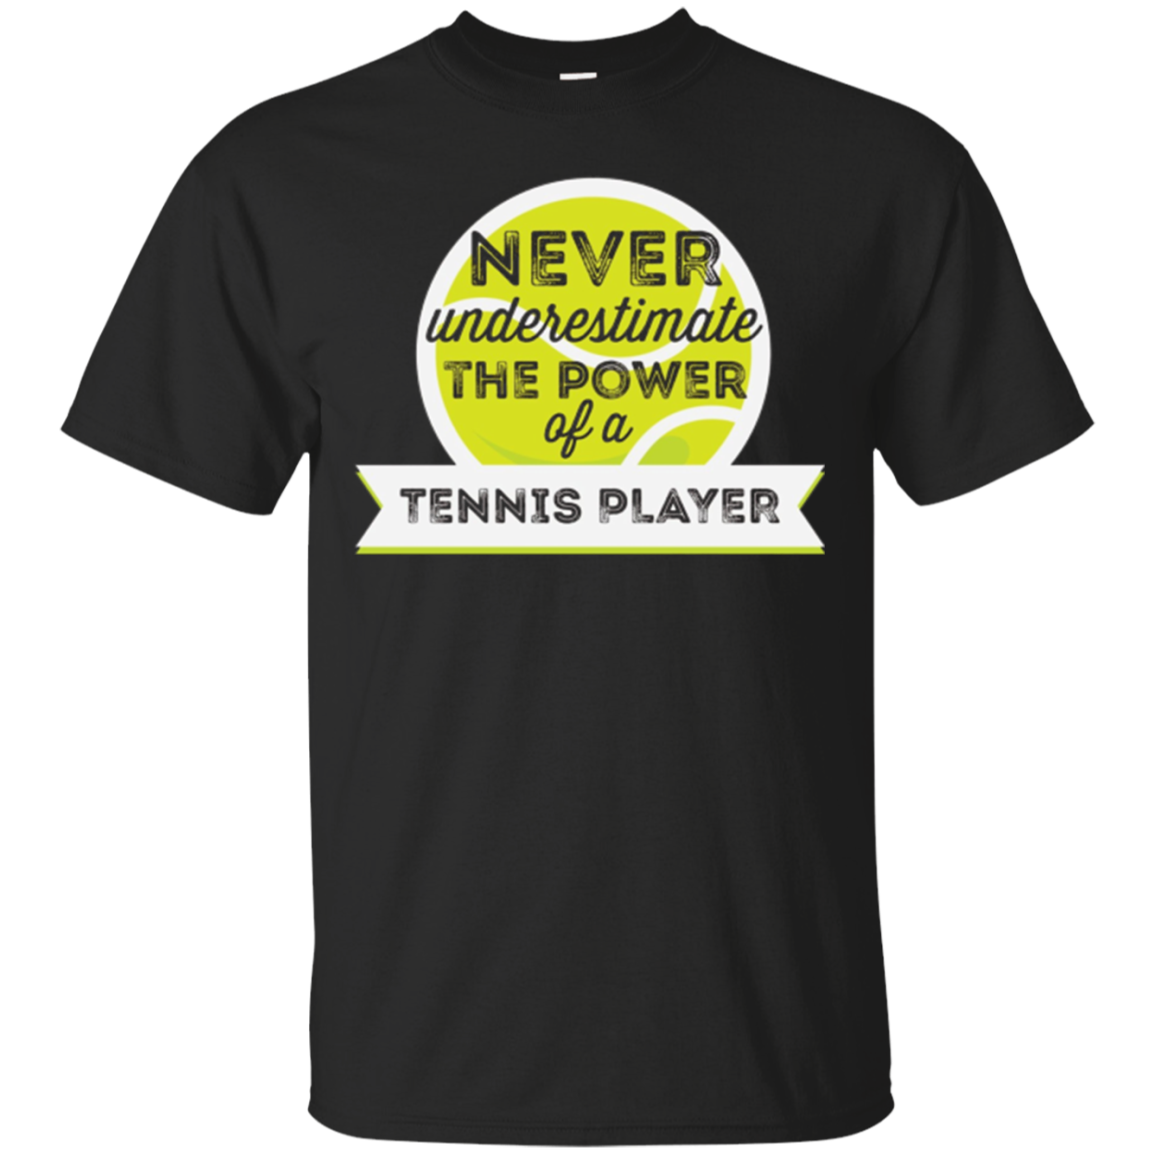 Tennis Player T-shirt - Never Underestimate The Power Of A